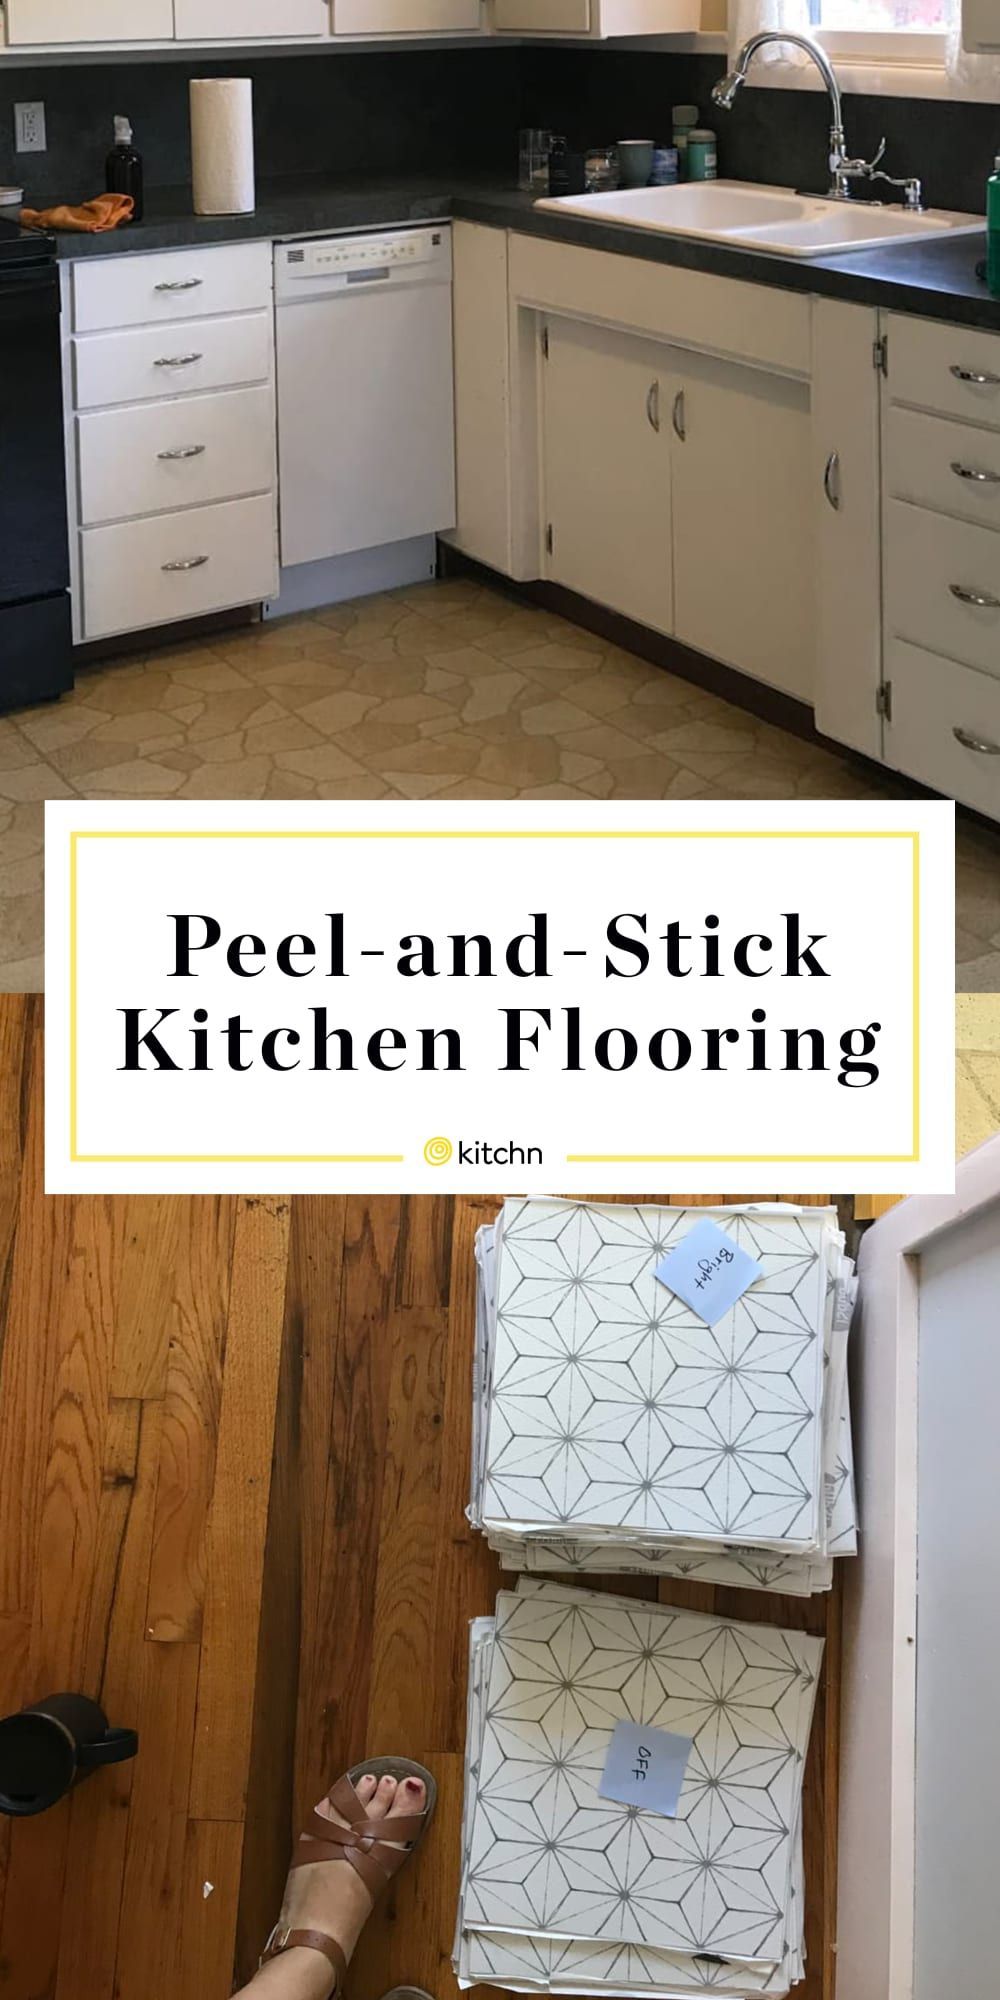 Before & After: I Made Over My Kitchen with Peel-and-Stick Tiles - Before & After: I Made Over My Kitchen with Peel-and-Stick Tiles -   18 diy Kitchen floor ideas